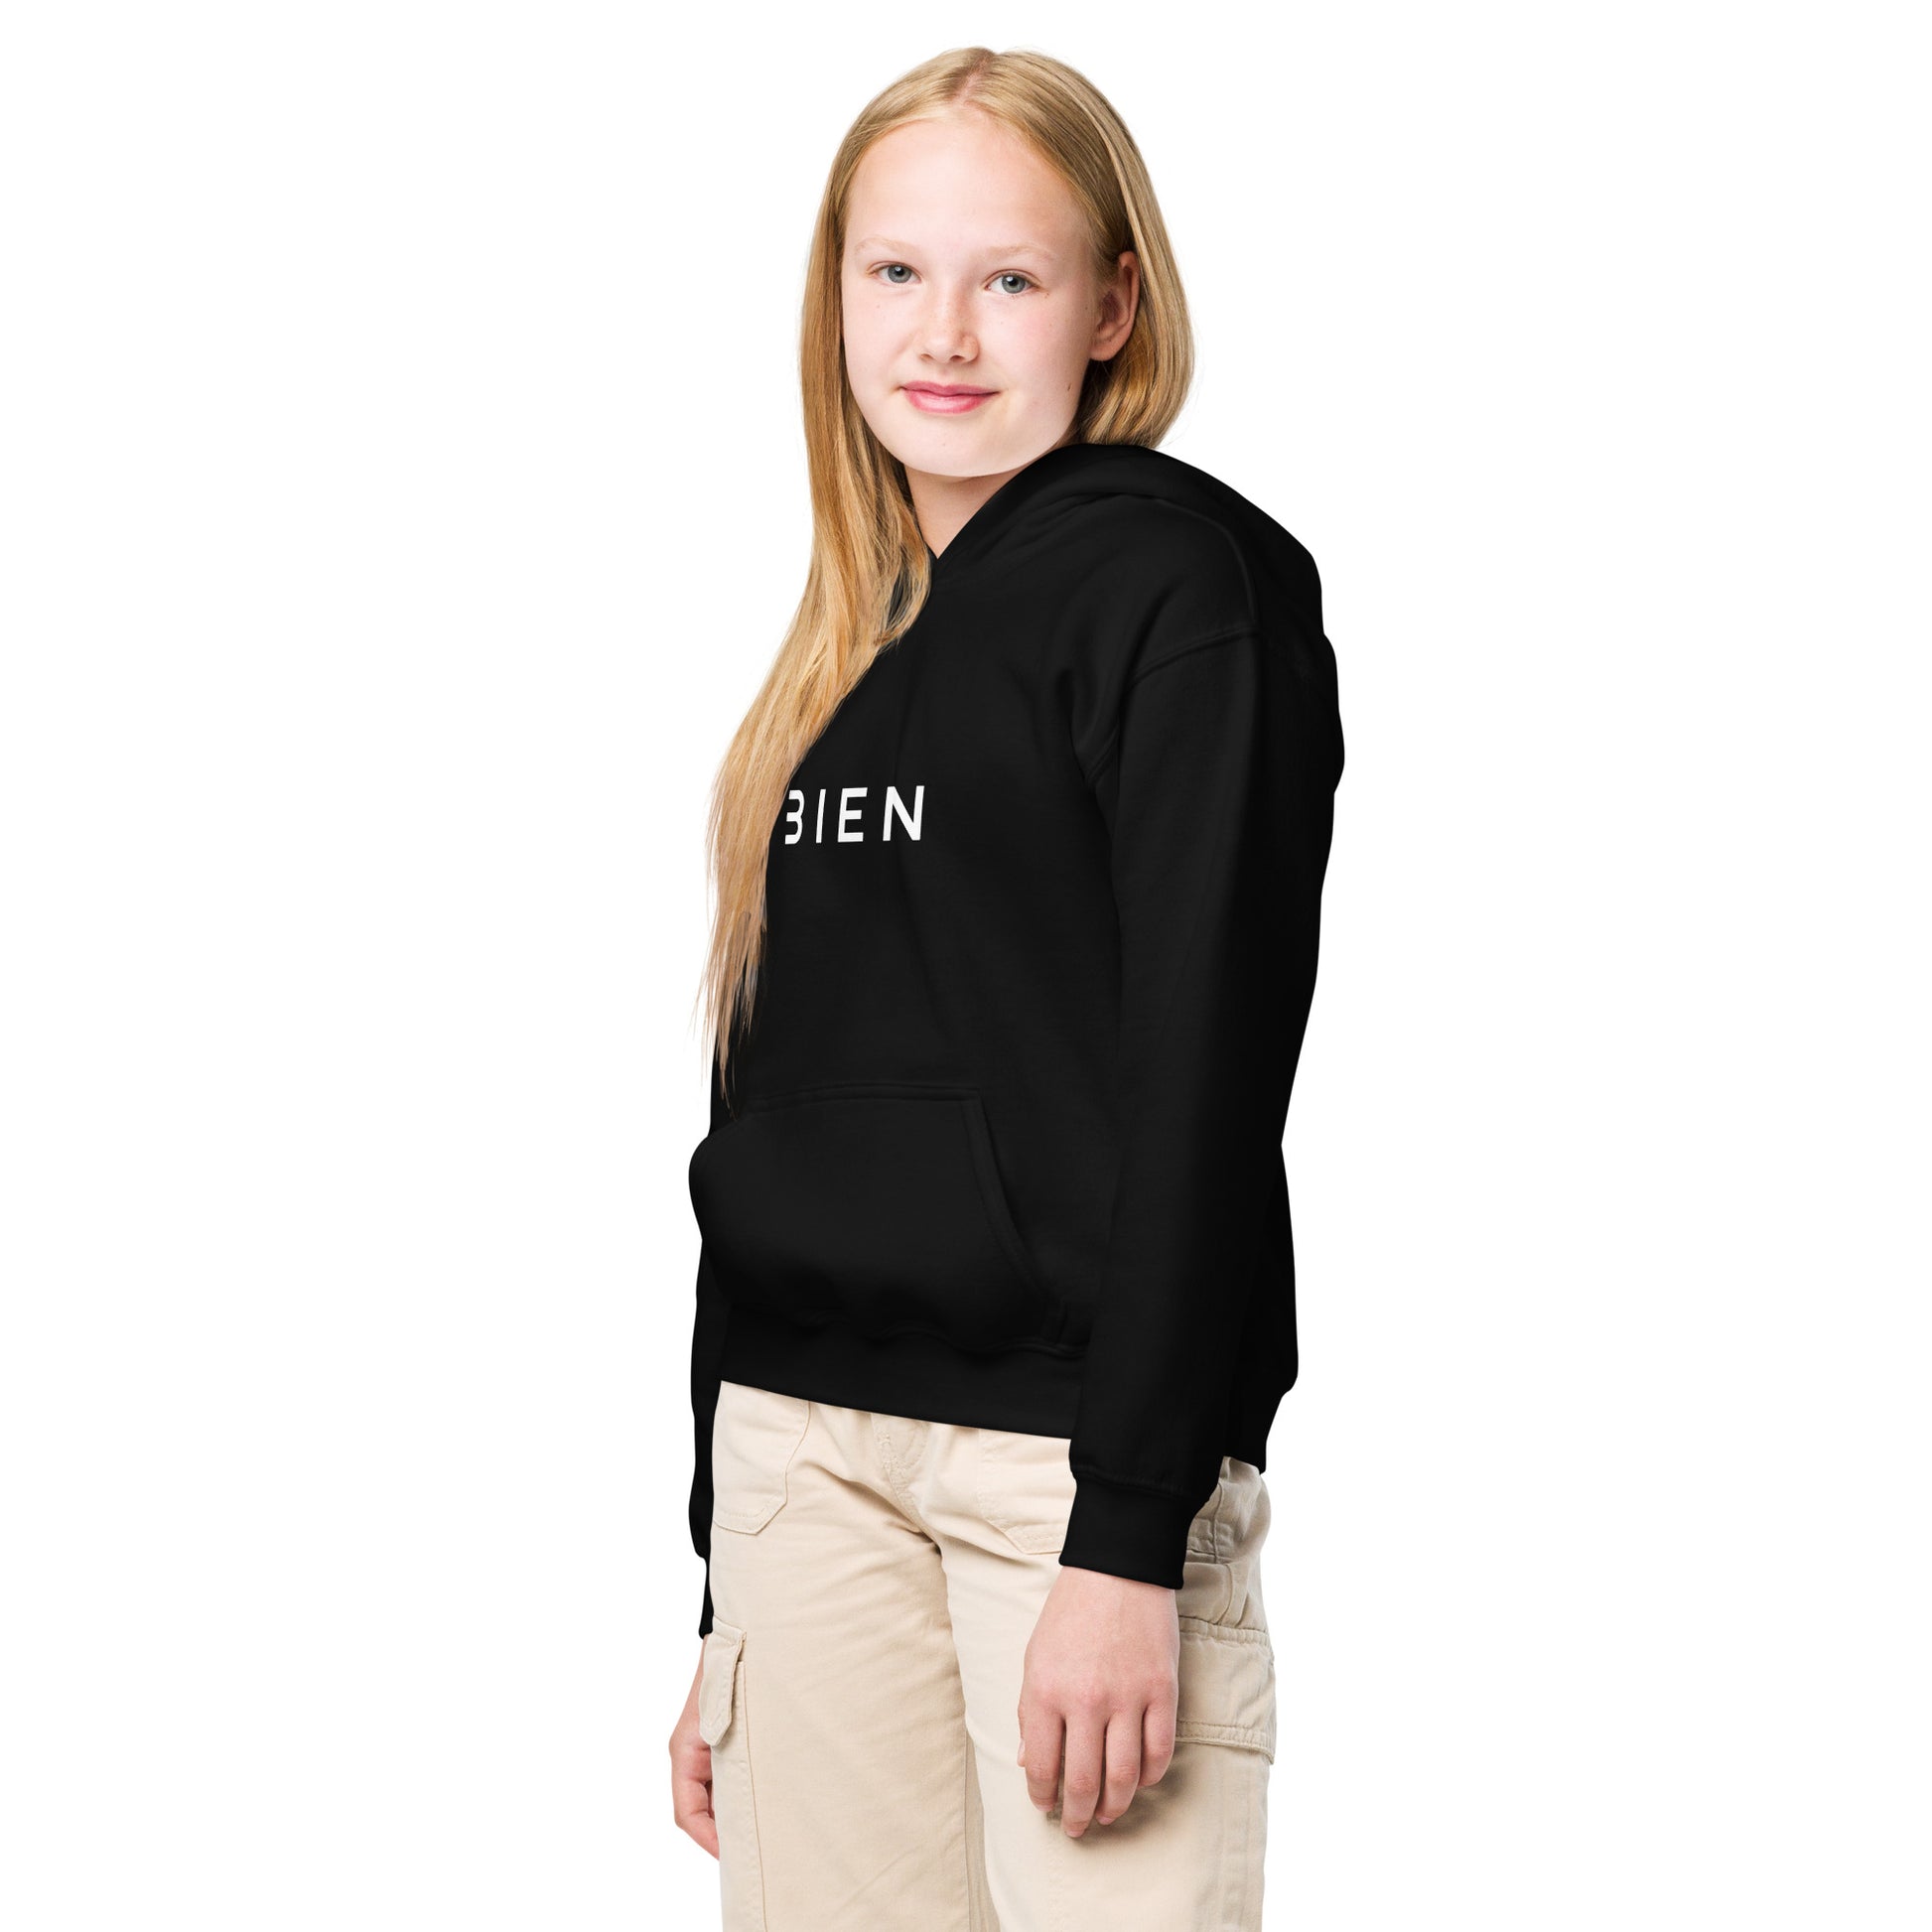 Youth Hoodies for Girls